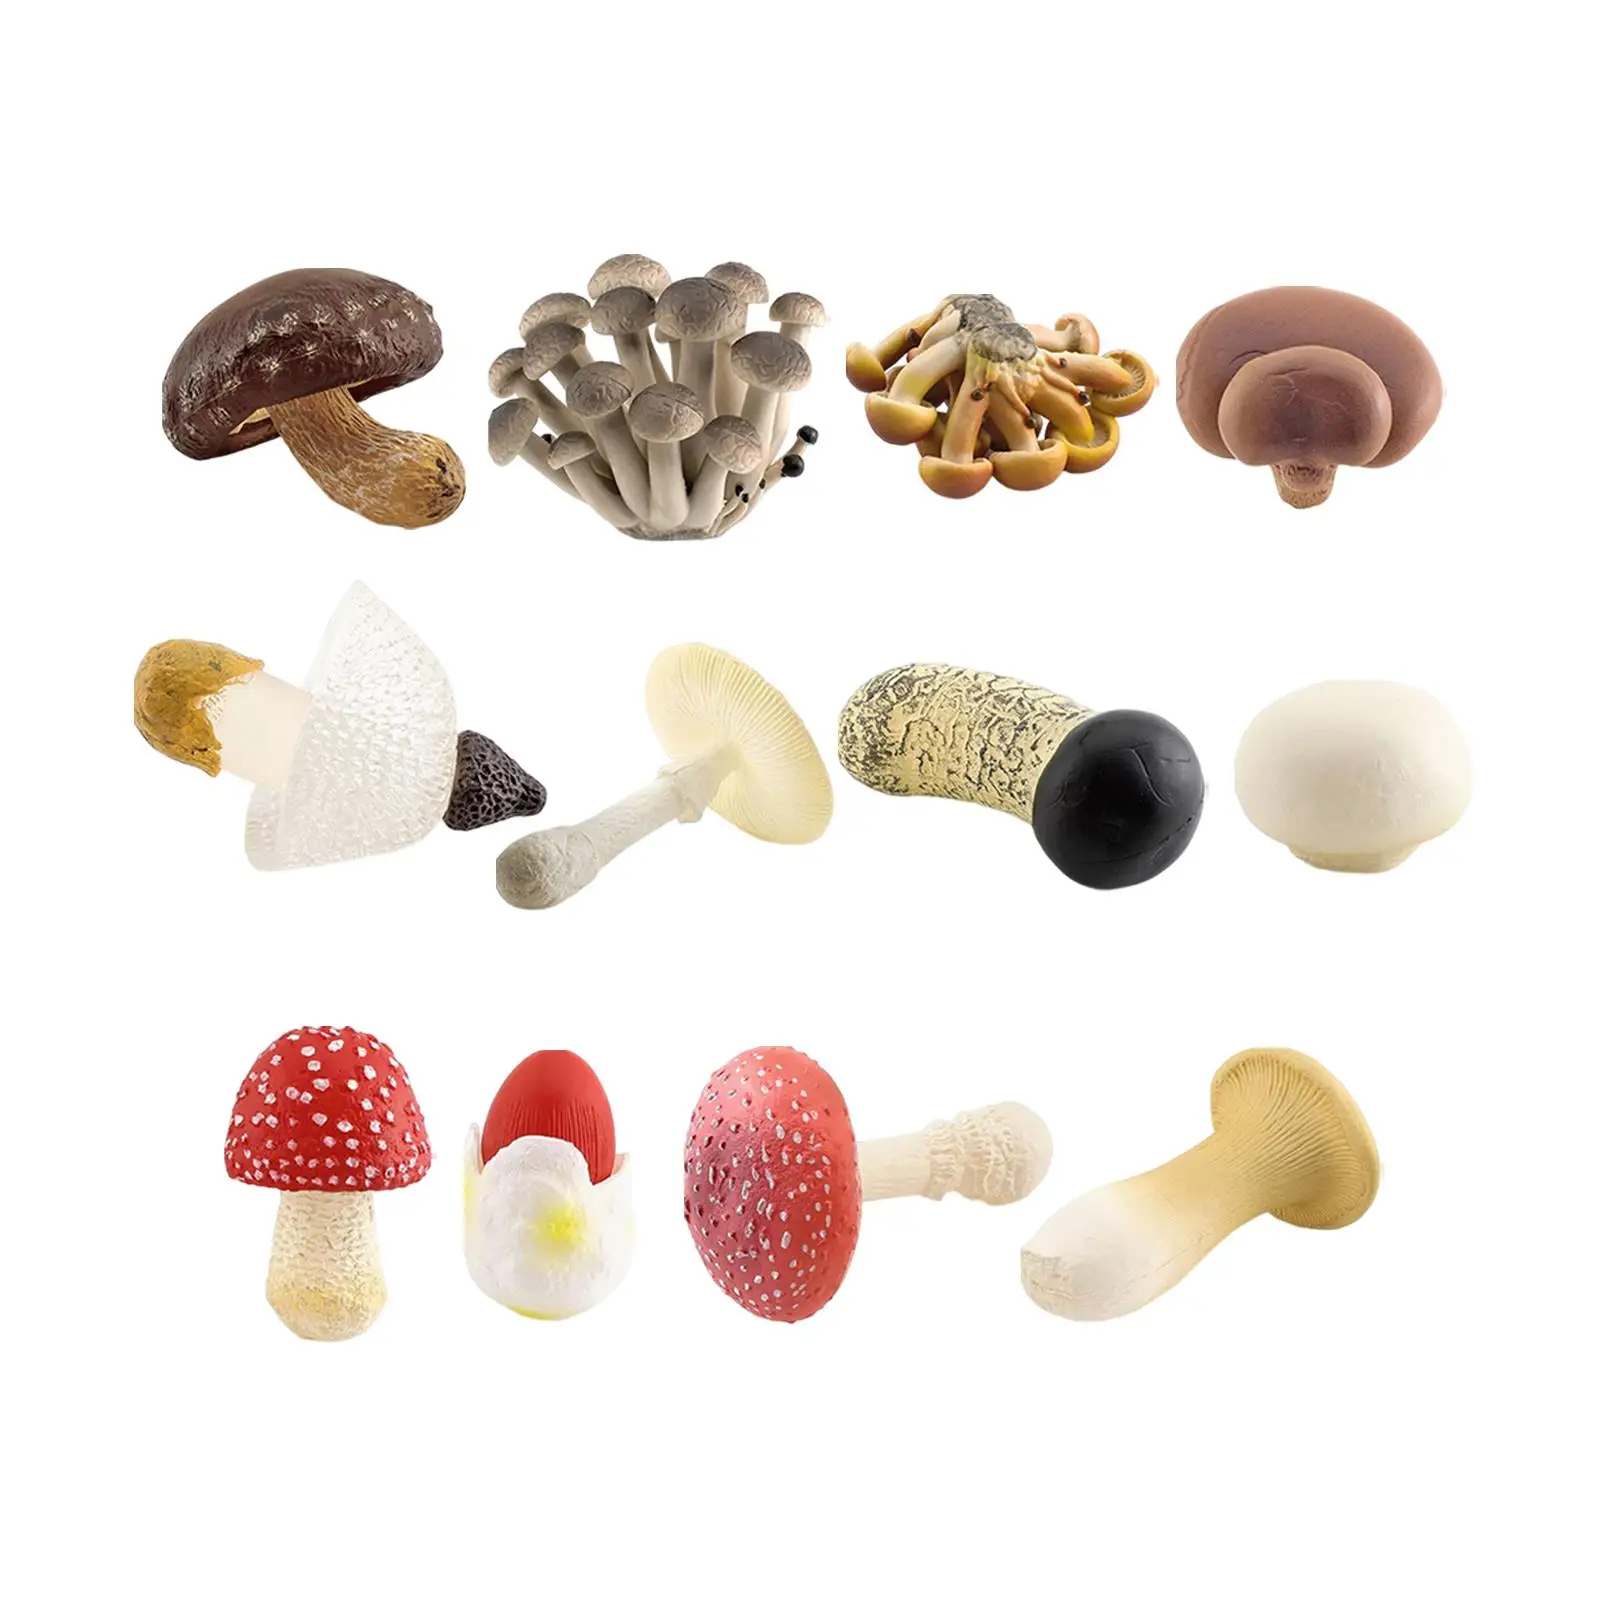 4 Pieces Mushroom Model Props Figurines for Micro Landscape Sand Table Scene Toddlers